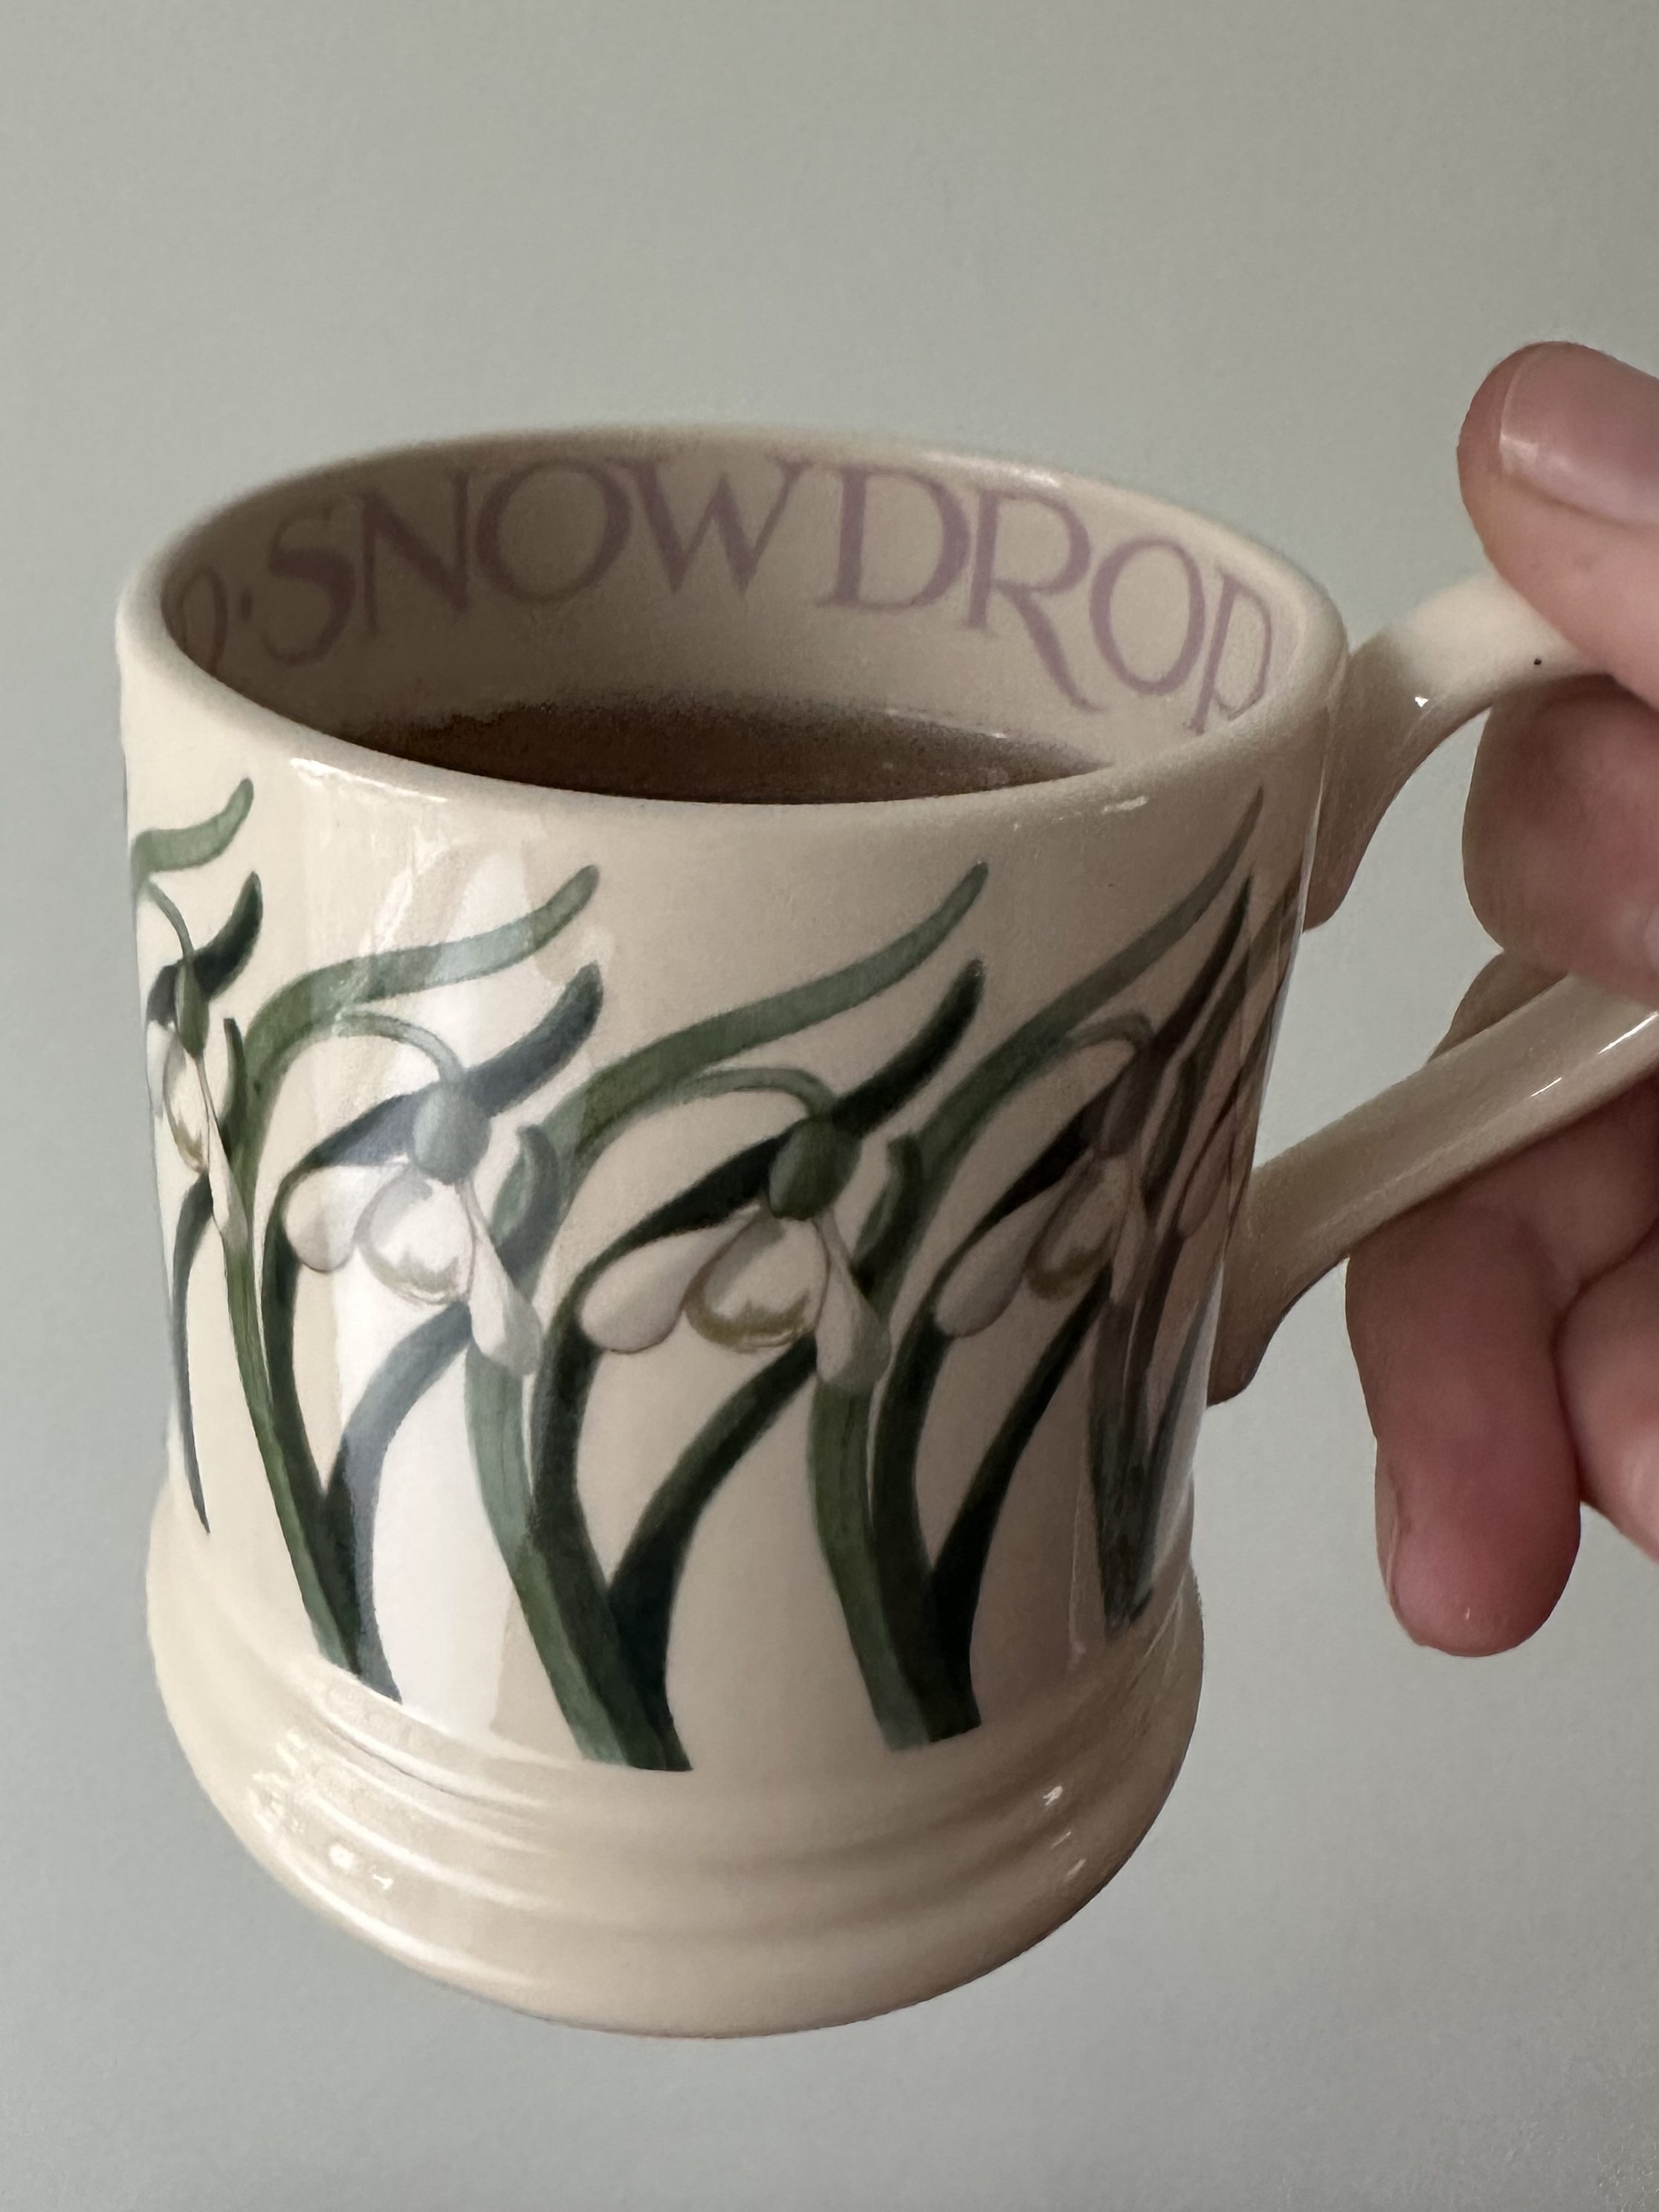 Emma Bridgewater tea cup with snowdrop pattern on it - a type of English pottery